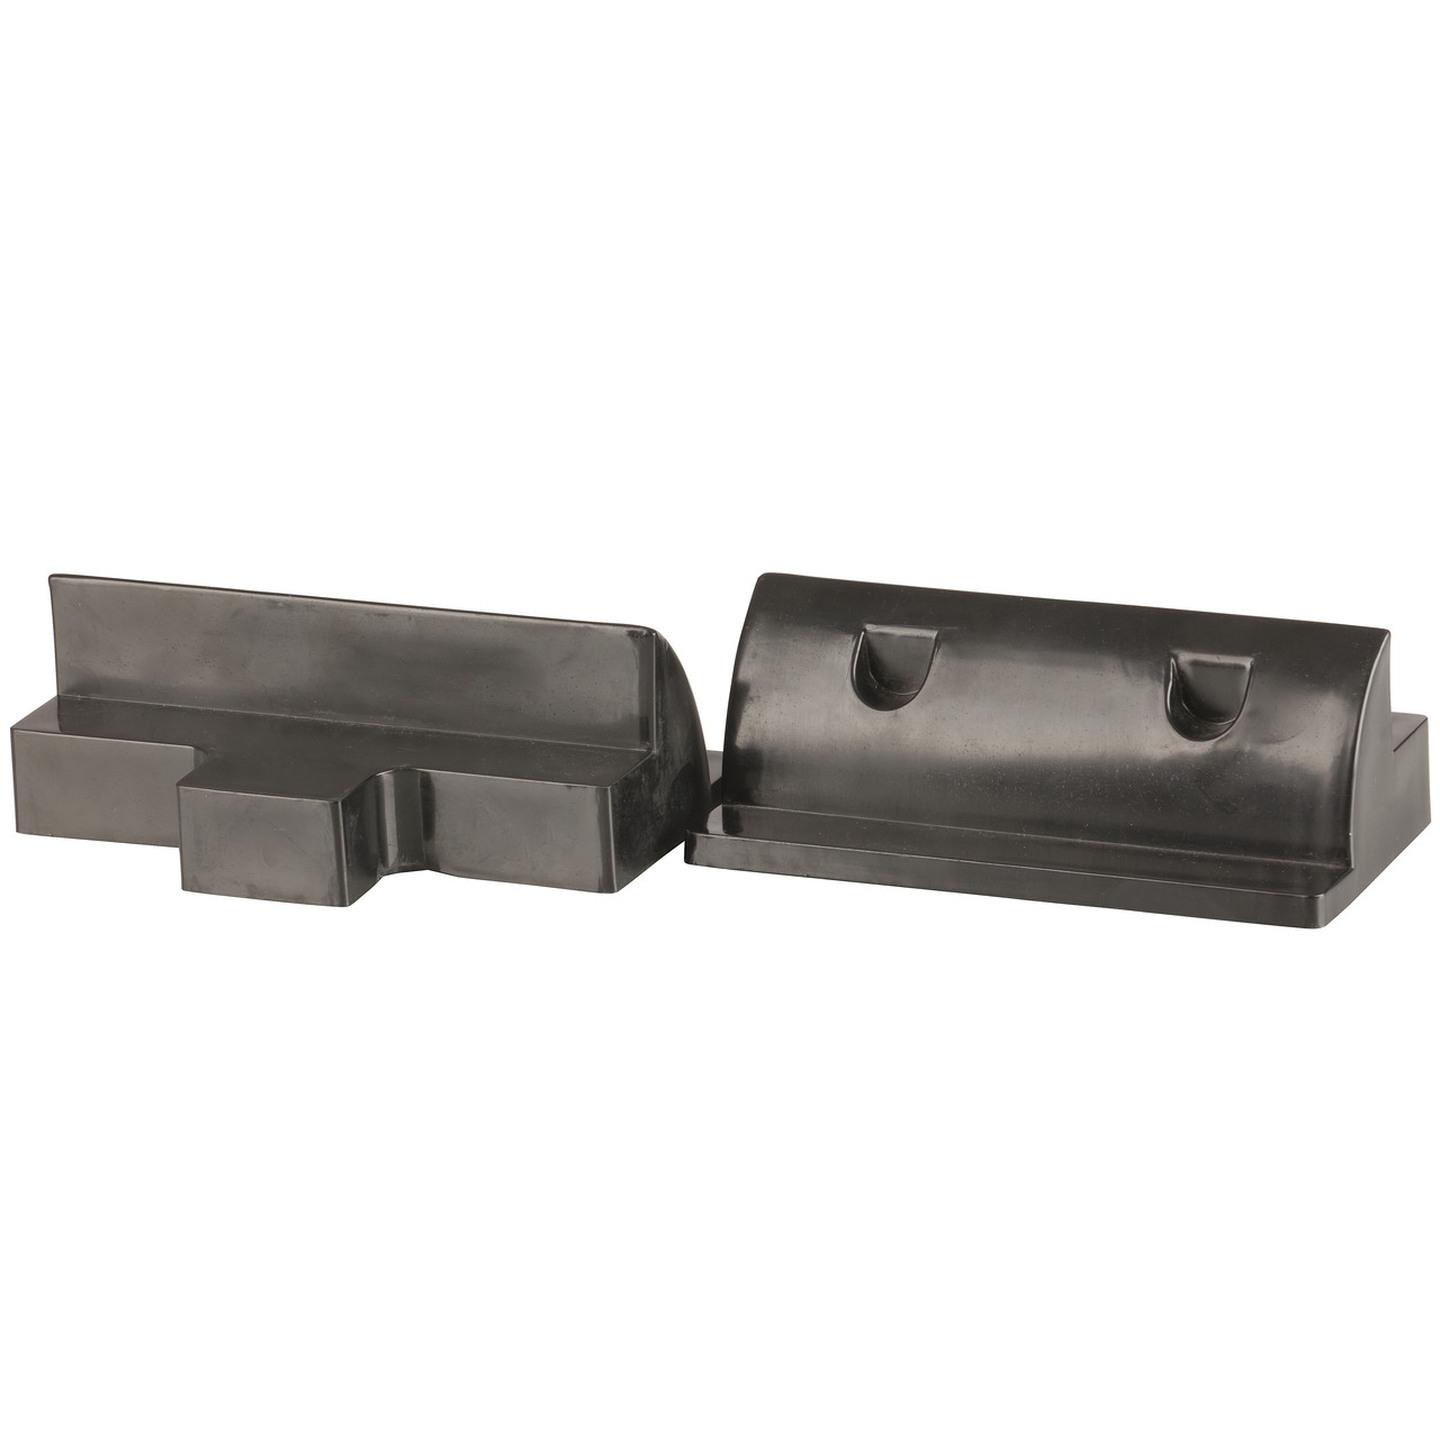 ABS Solar Panel Side Mounts 180mm Pair